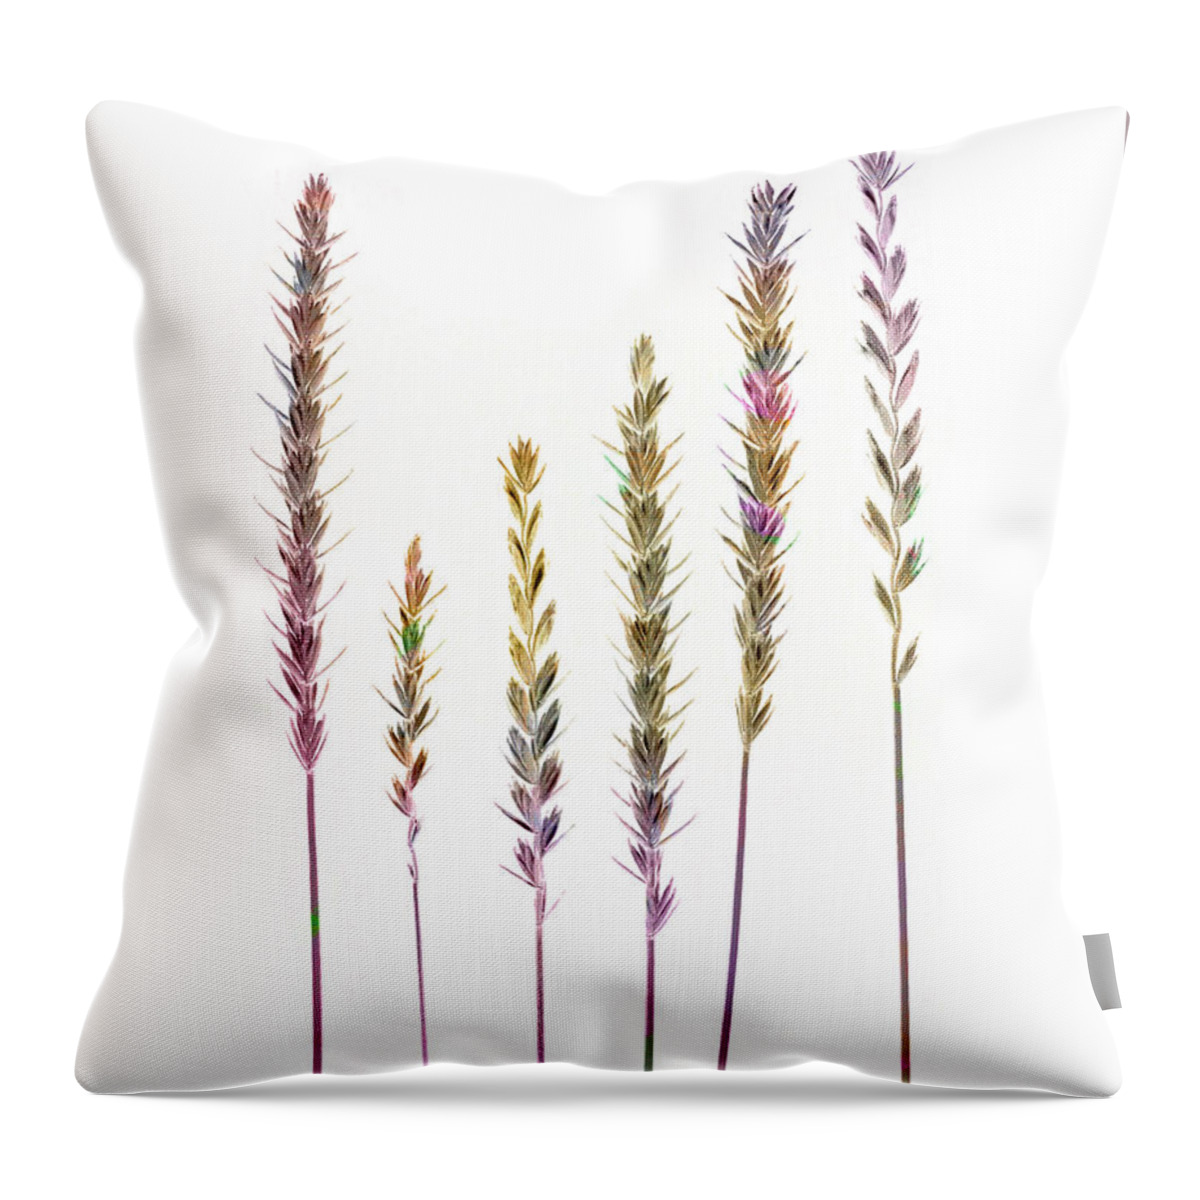 Grasses Throw Pillow featuring the digital art Colorful Grasses by Sandra Foster